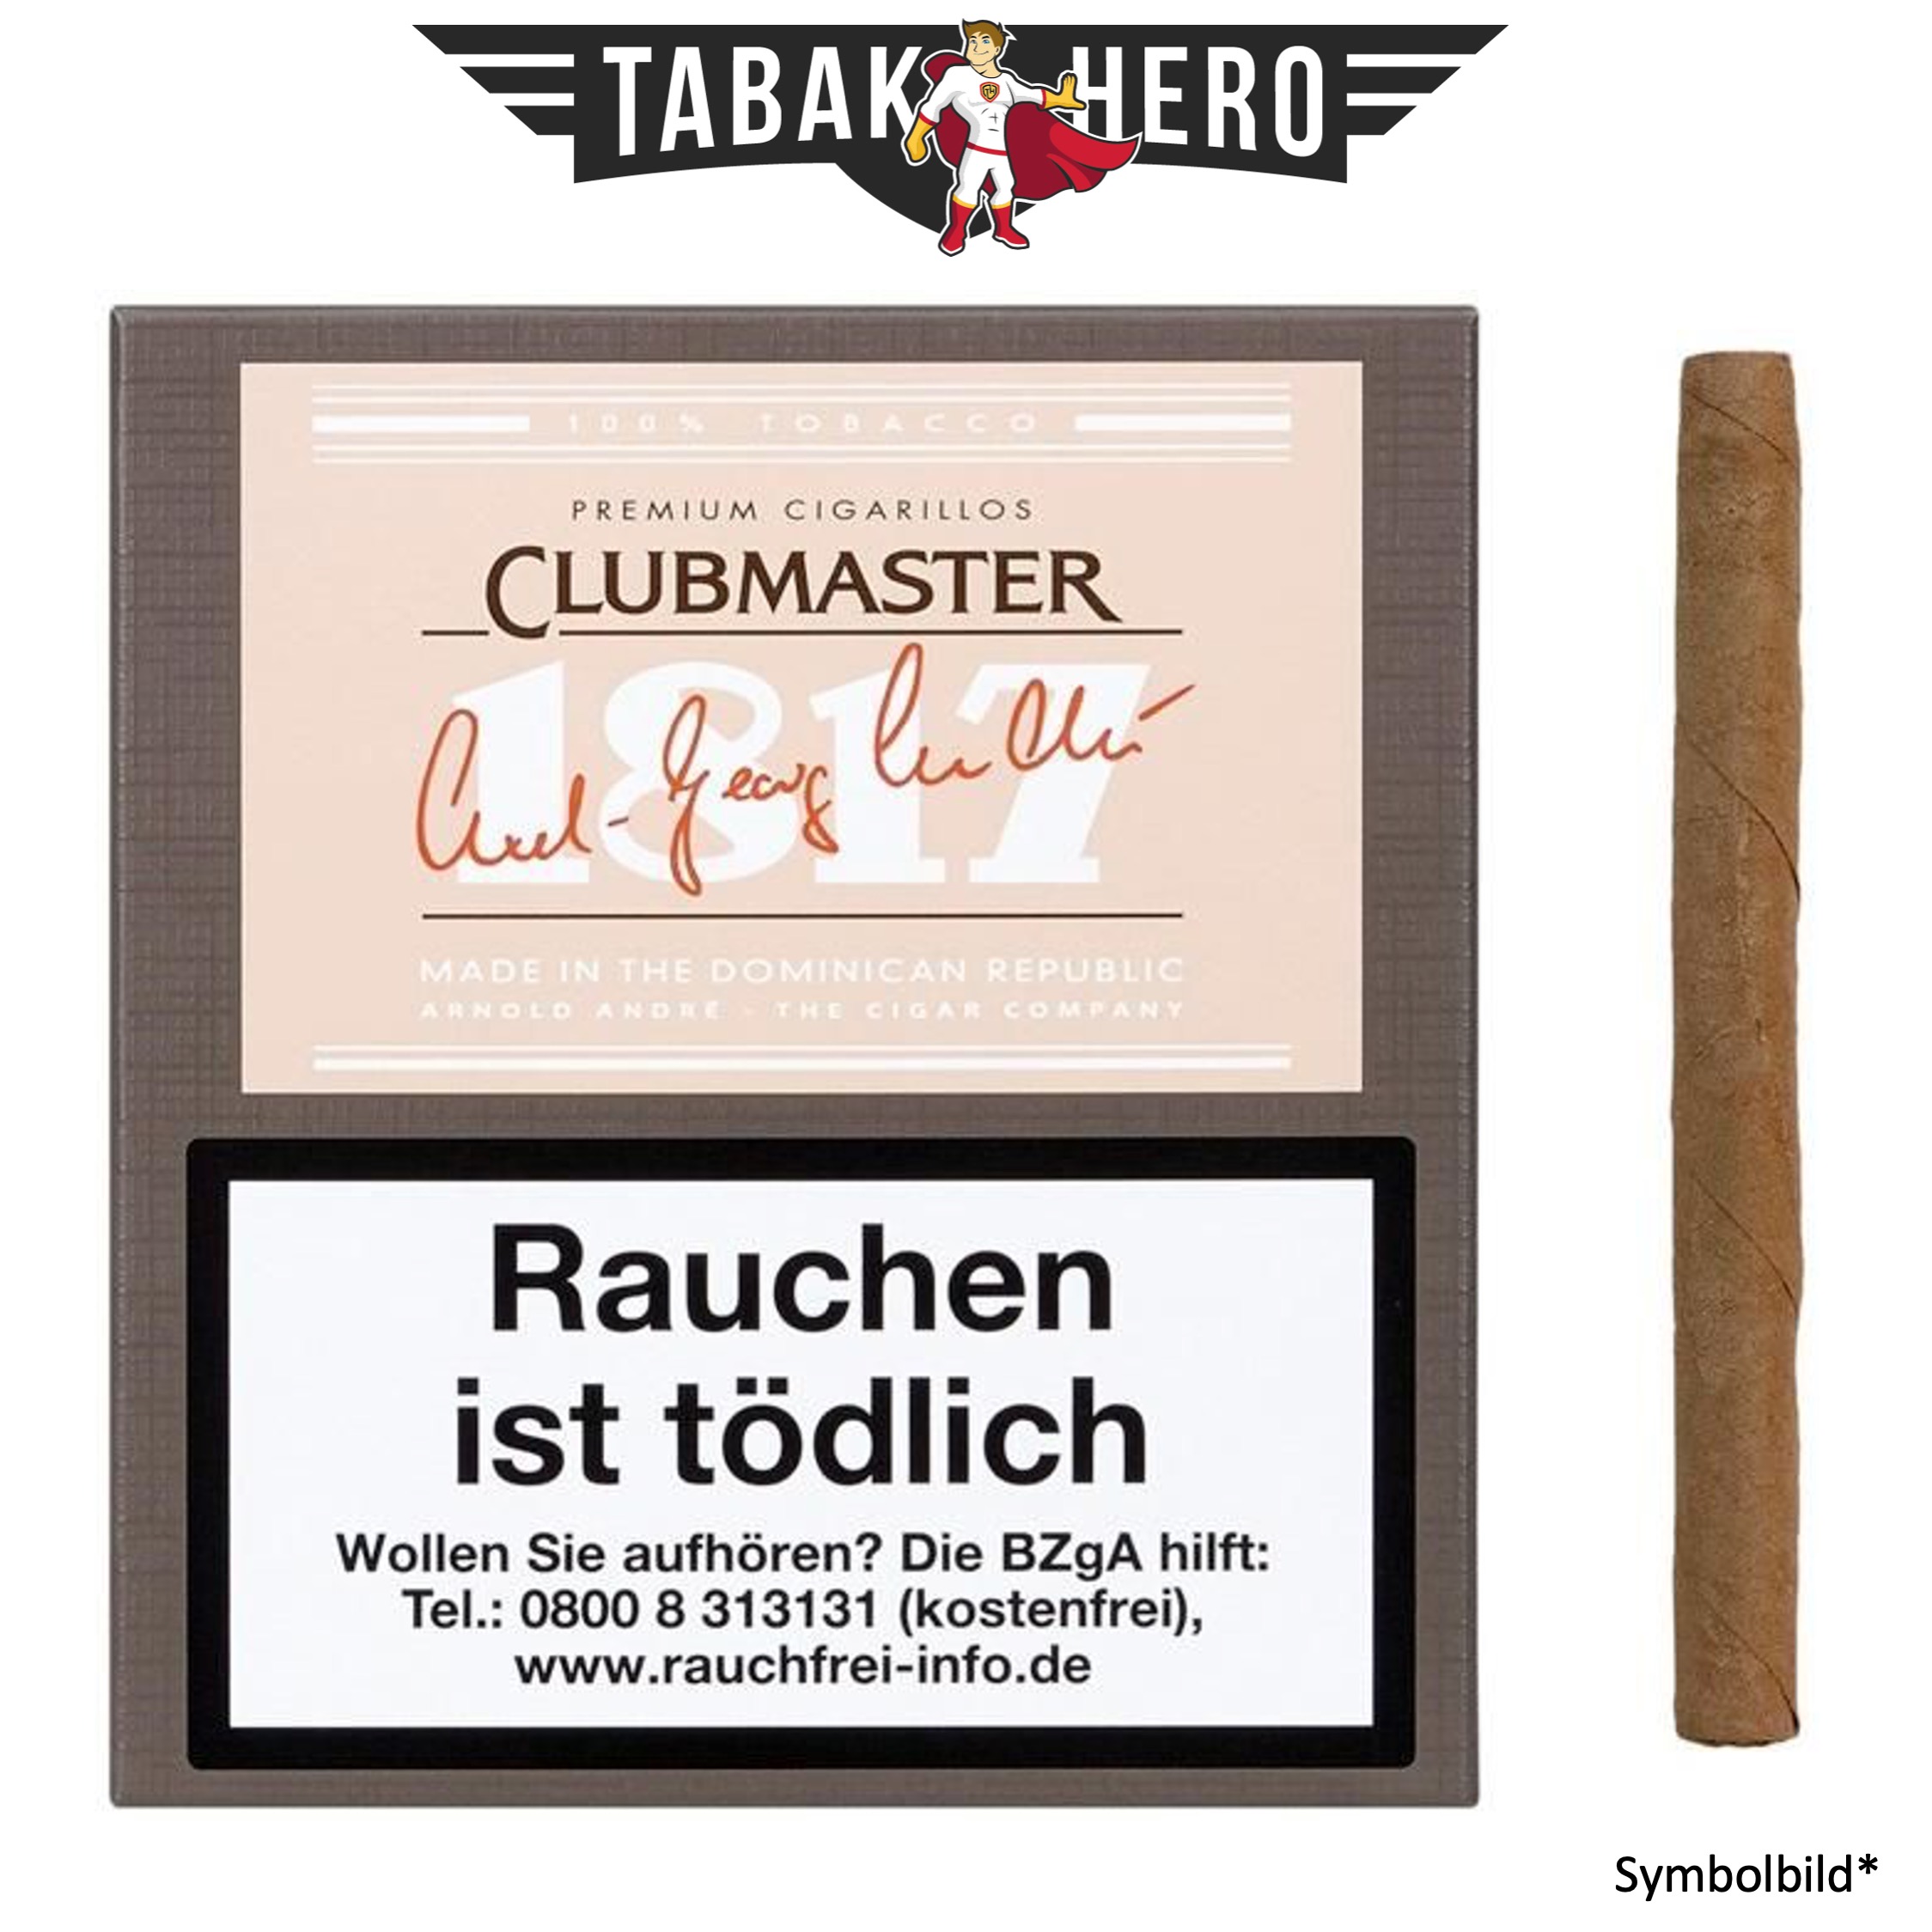 Clubmaster 200 1817 (5x20 Zigarillos)